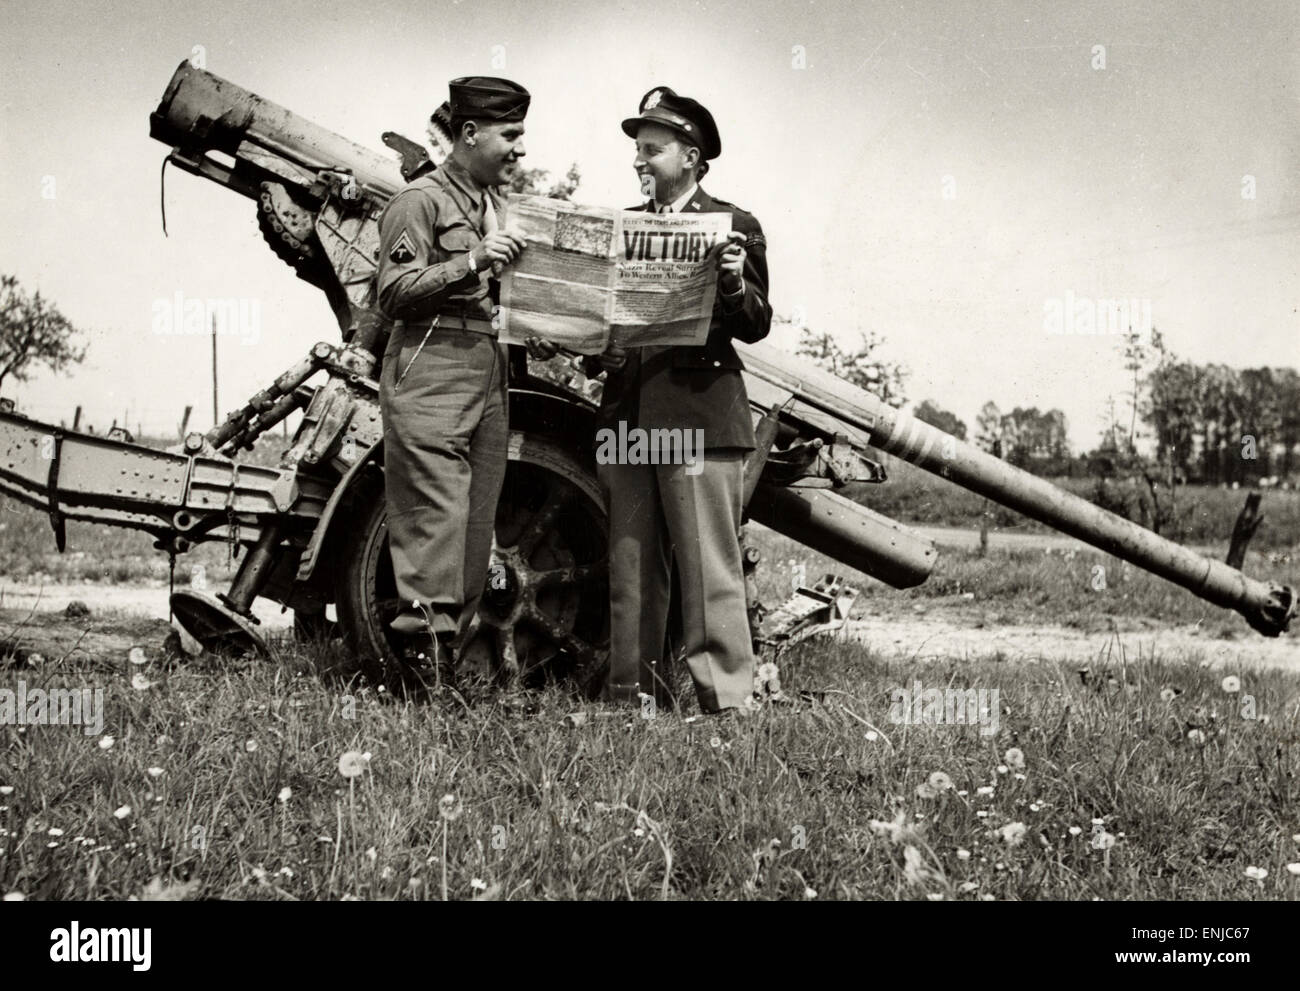 Victory in Europe. Soldiers read of victory, standing by a German 88 mm gun at Verdun, France on VE Day 1945 Stock Photo